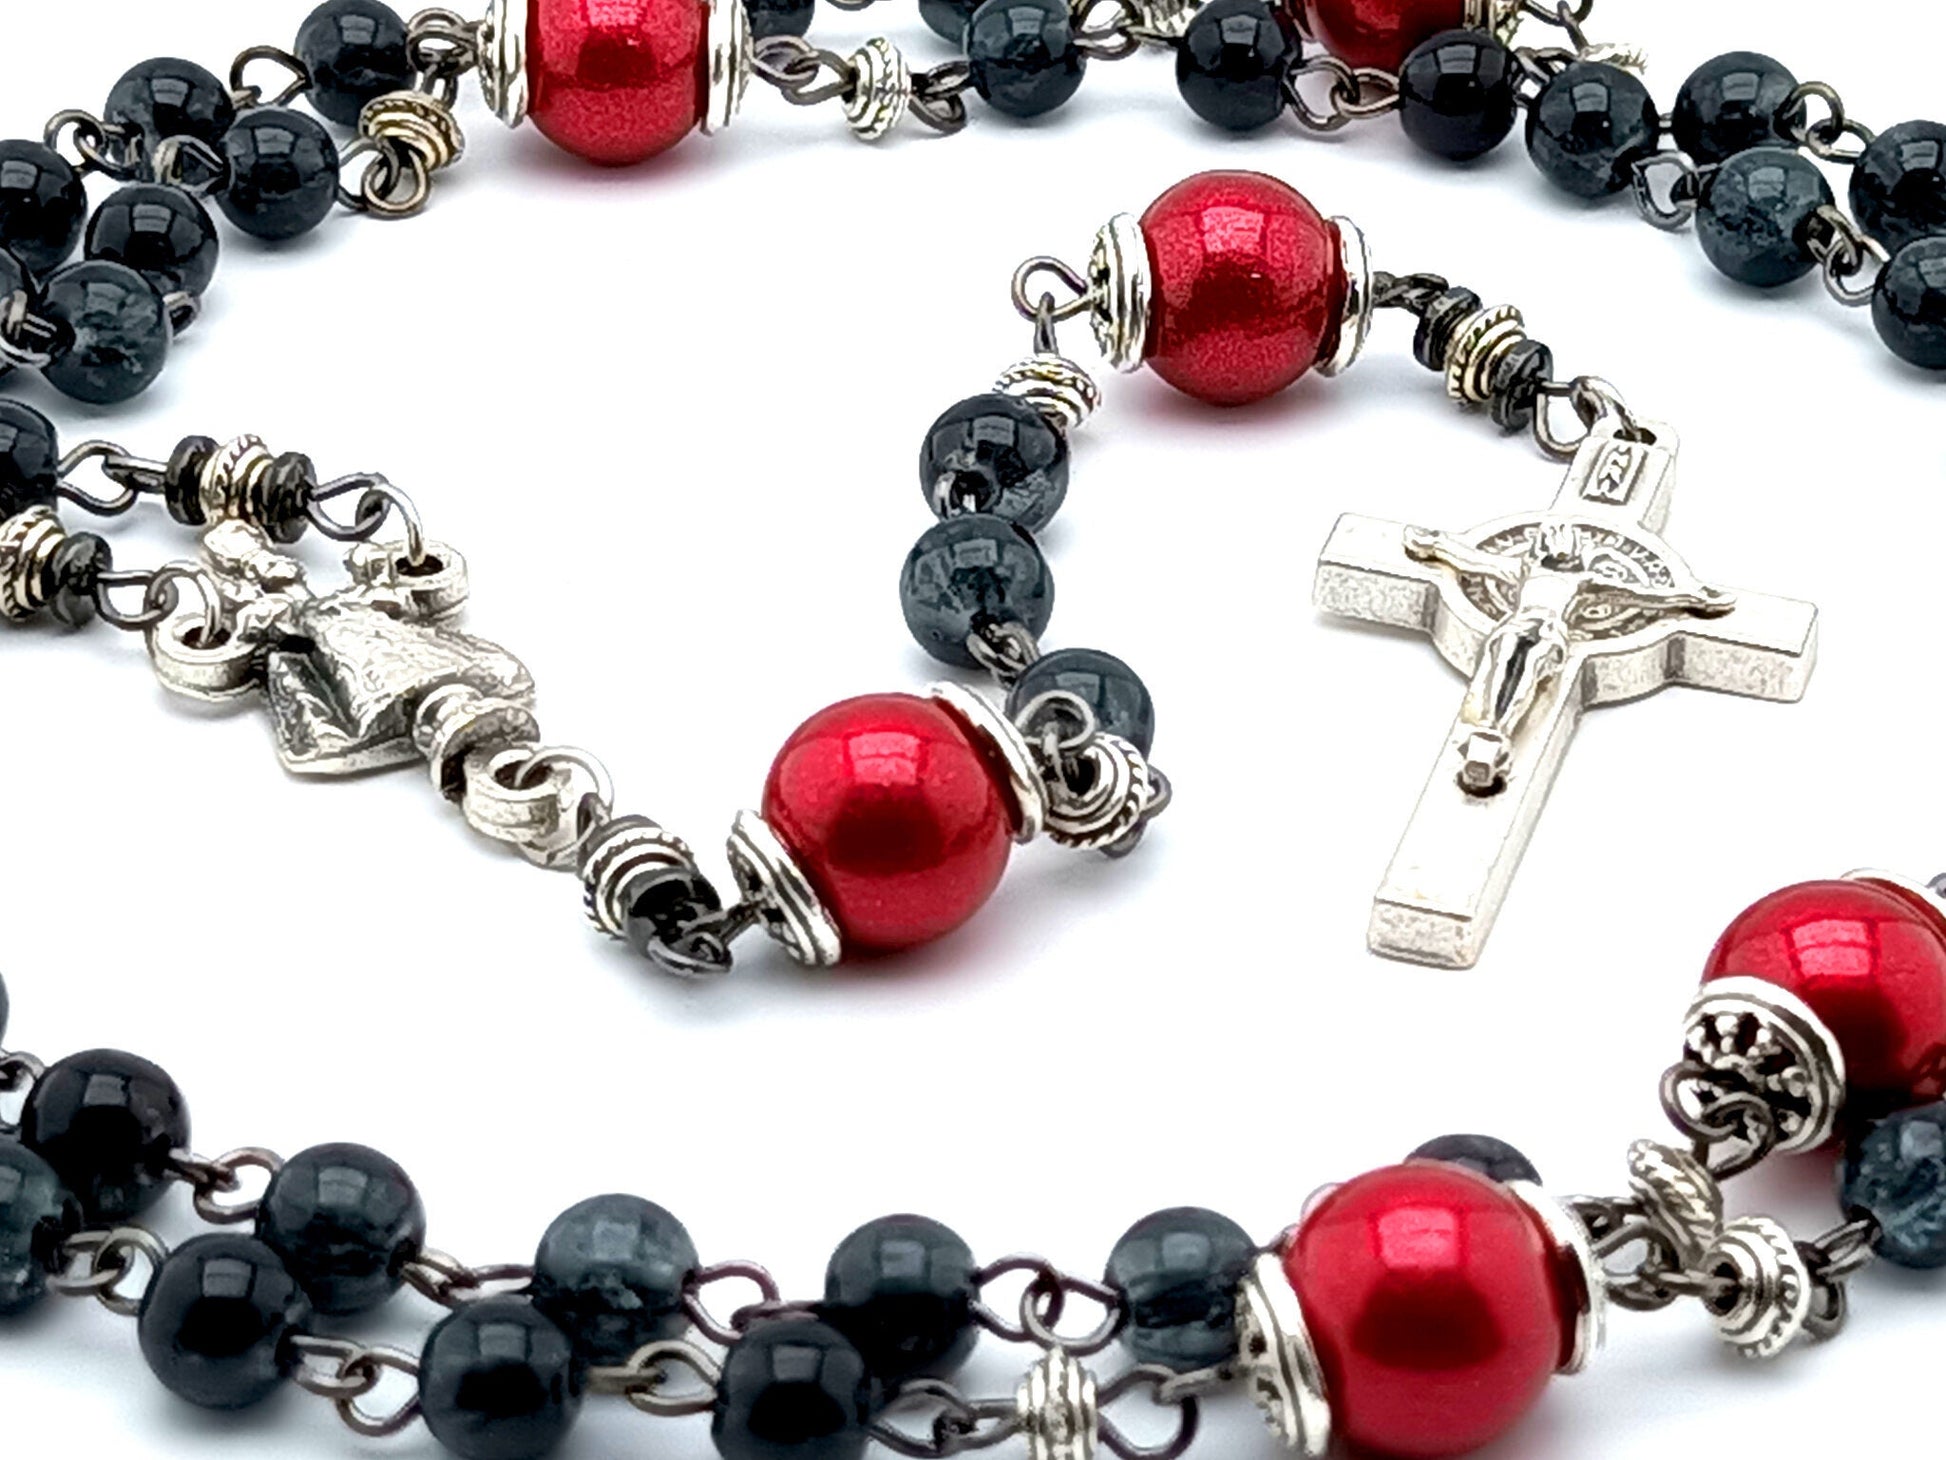 Infant of Prague unique rosary beads with black and red glass beads, silver Saint Benedict crucifix and centre medal.